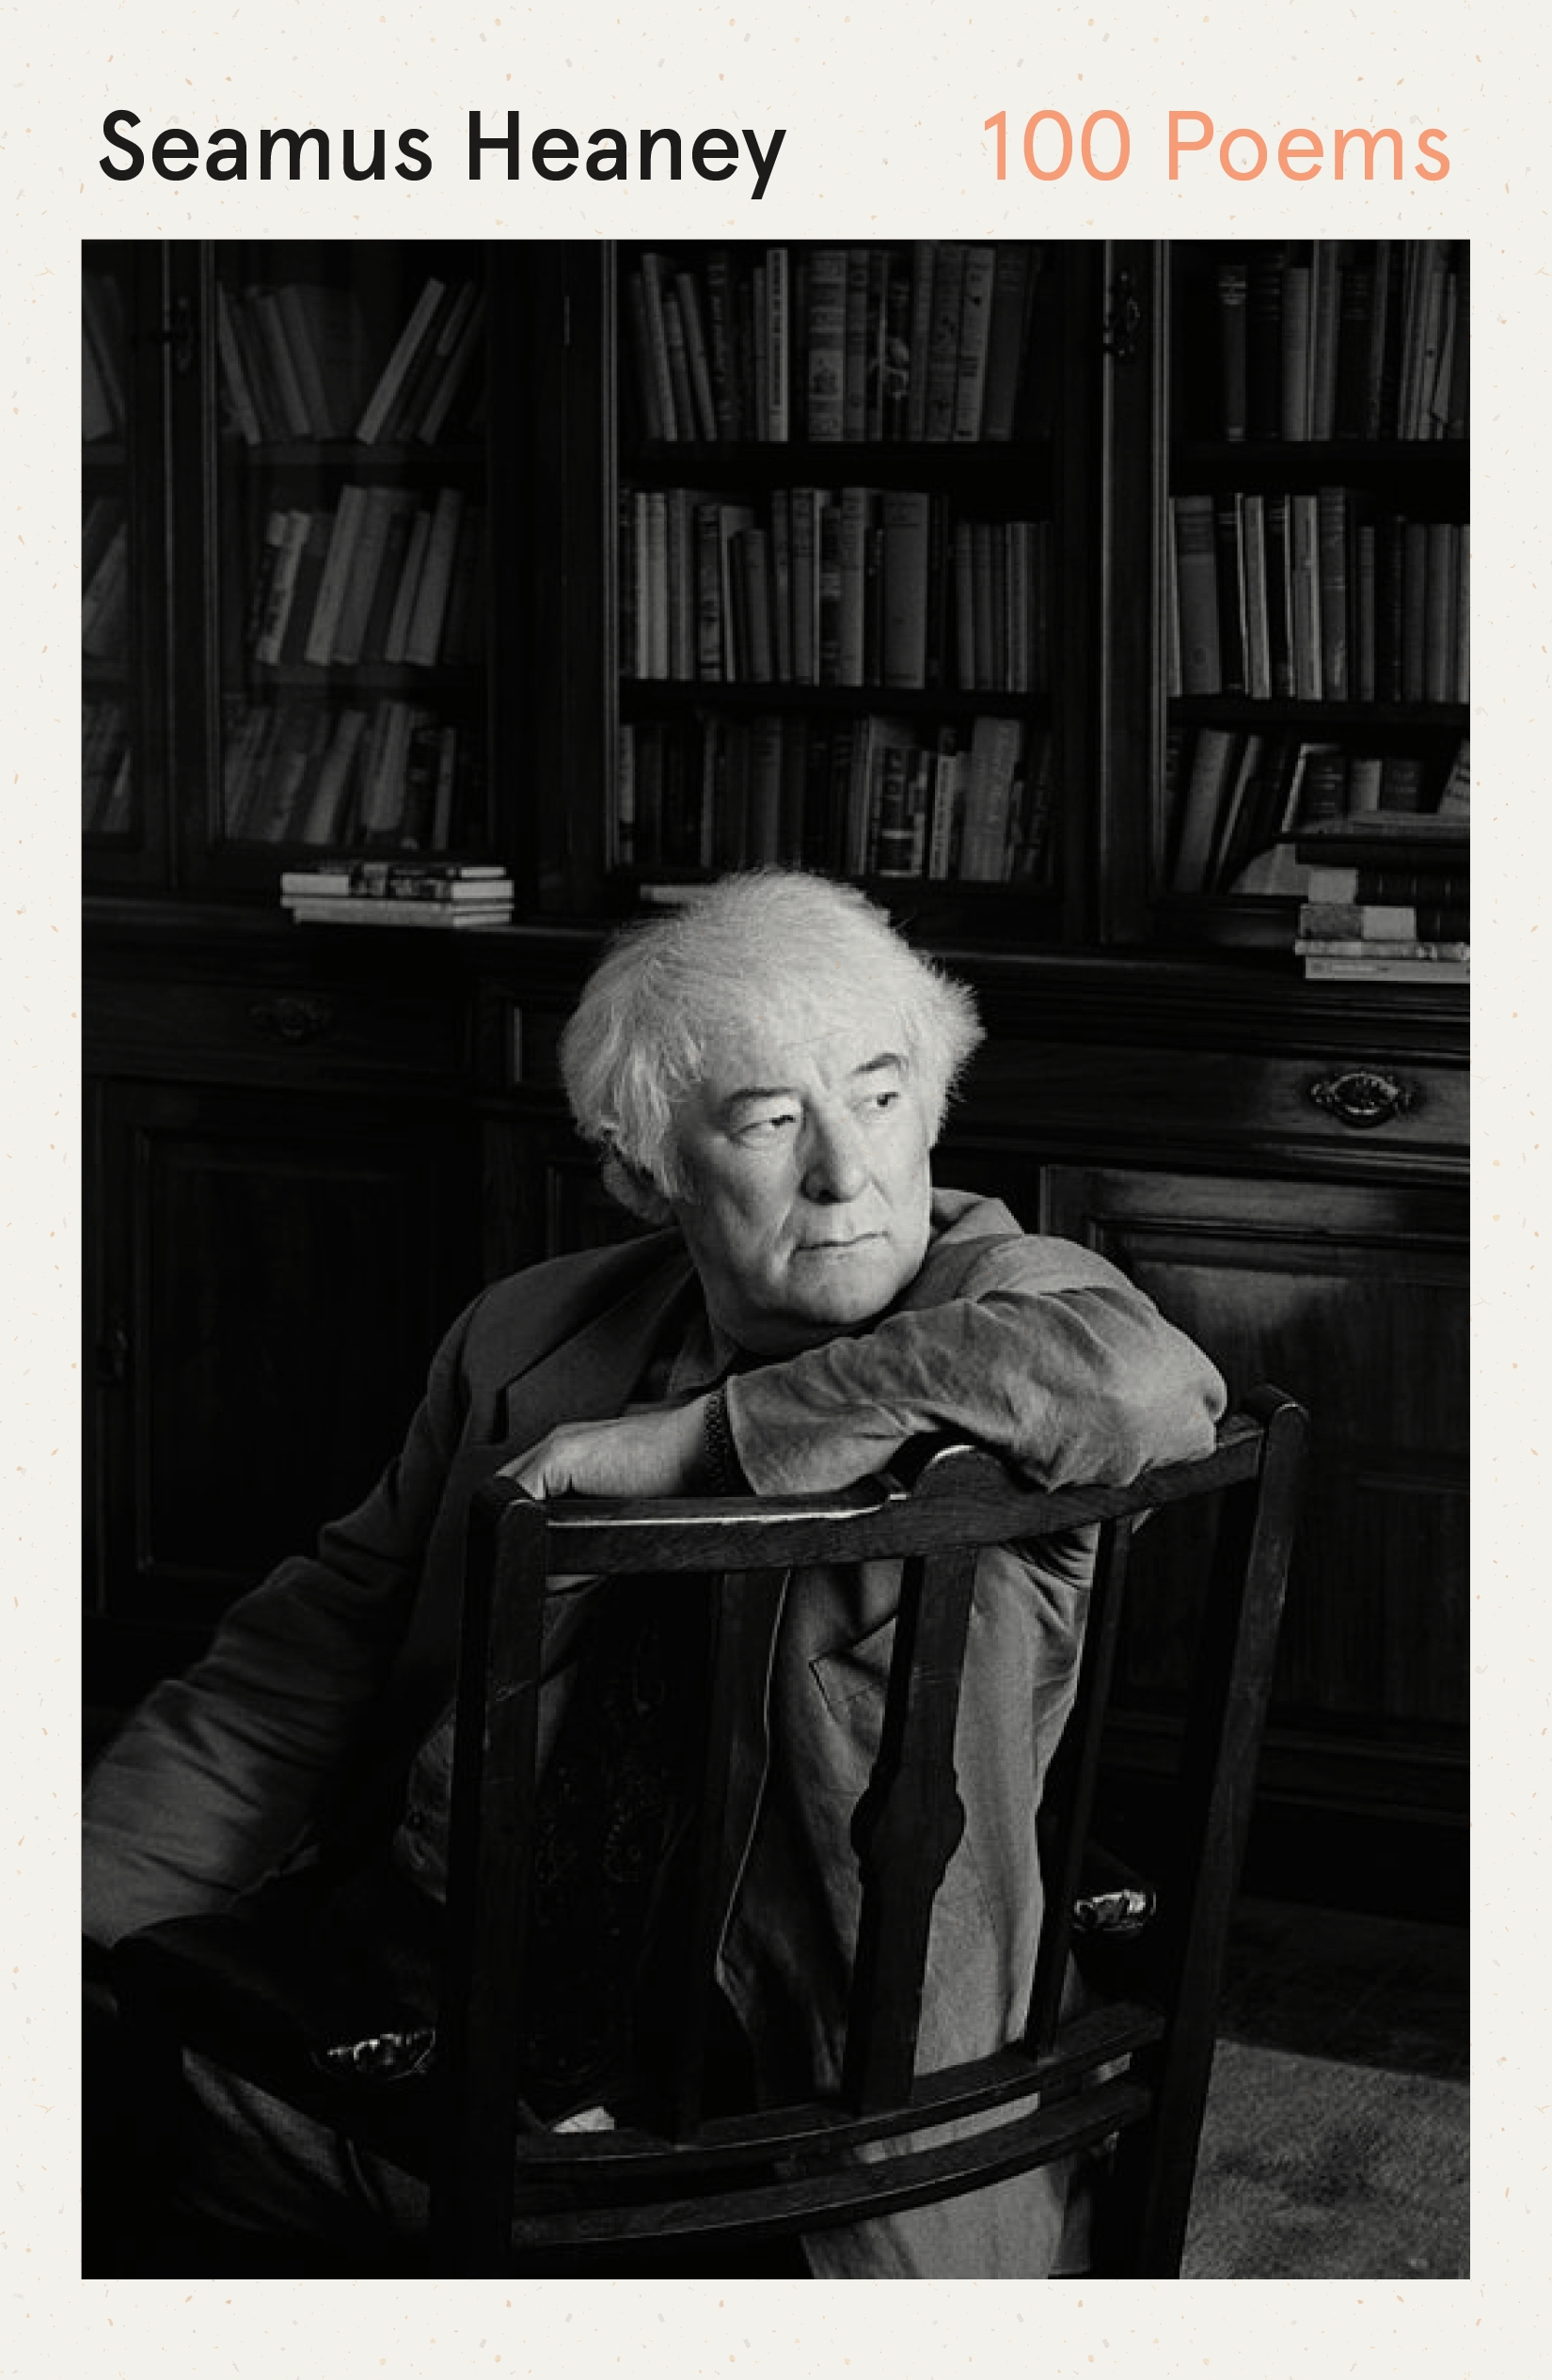 Book “100 Poems” by Seamus Heaney — August 20, 2019